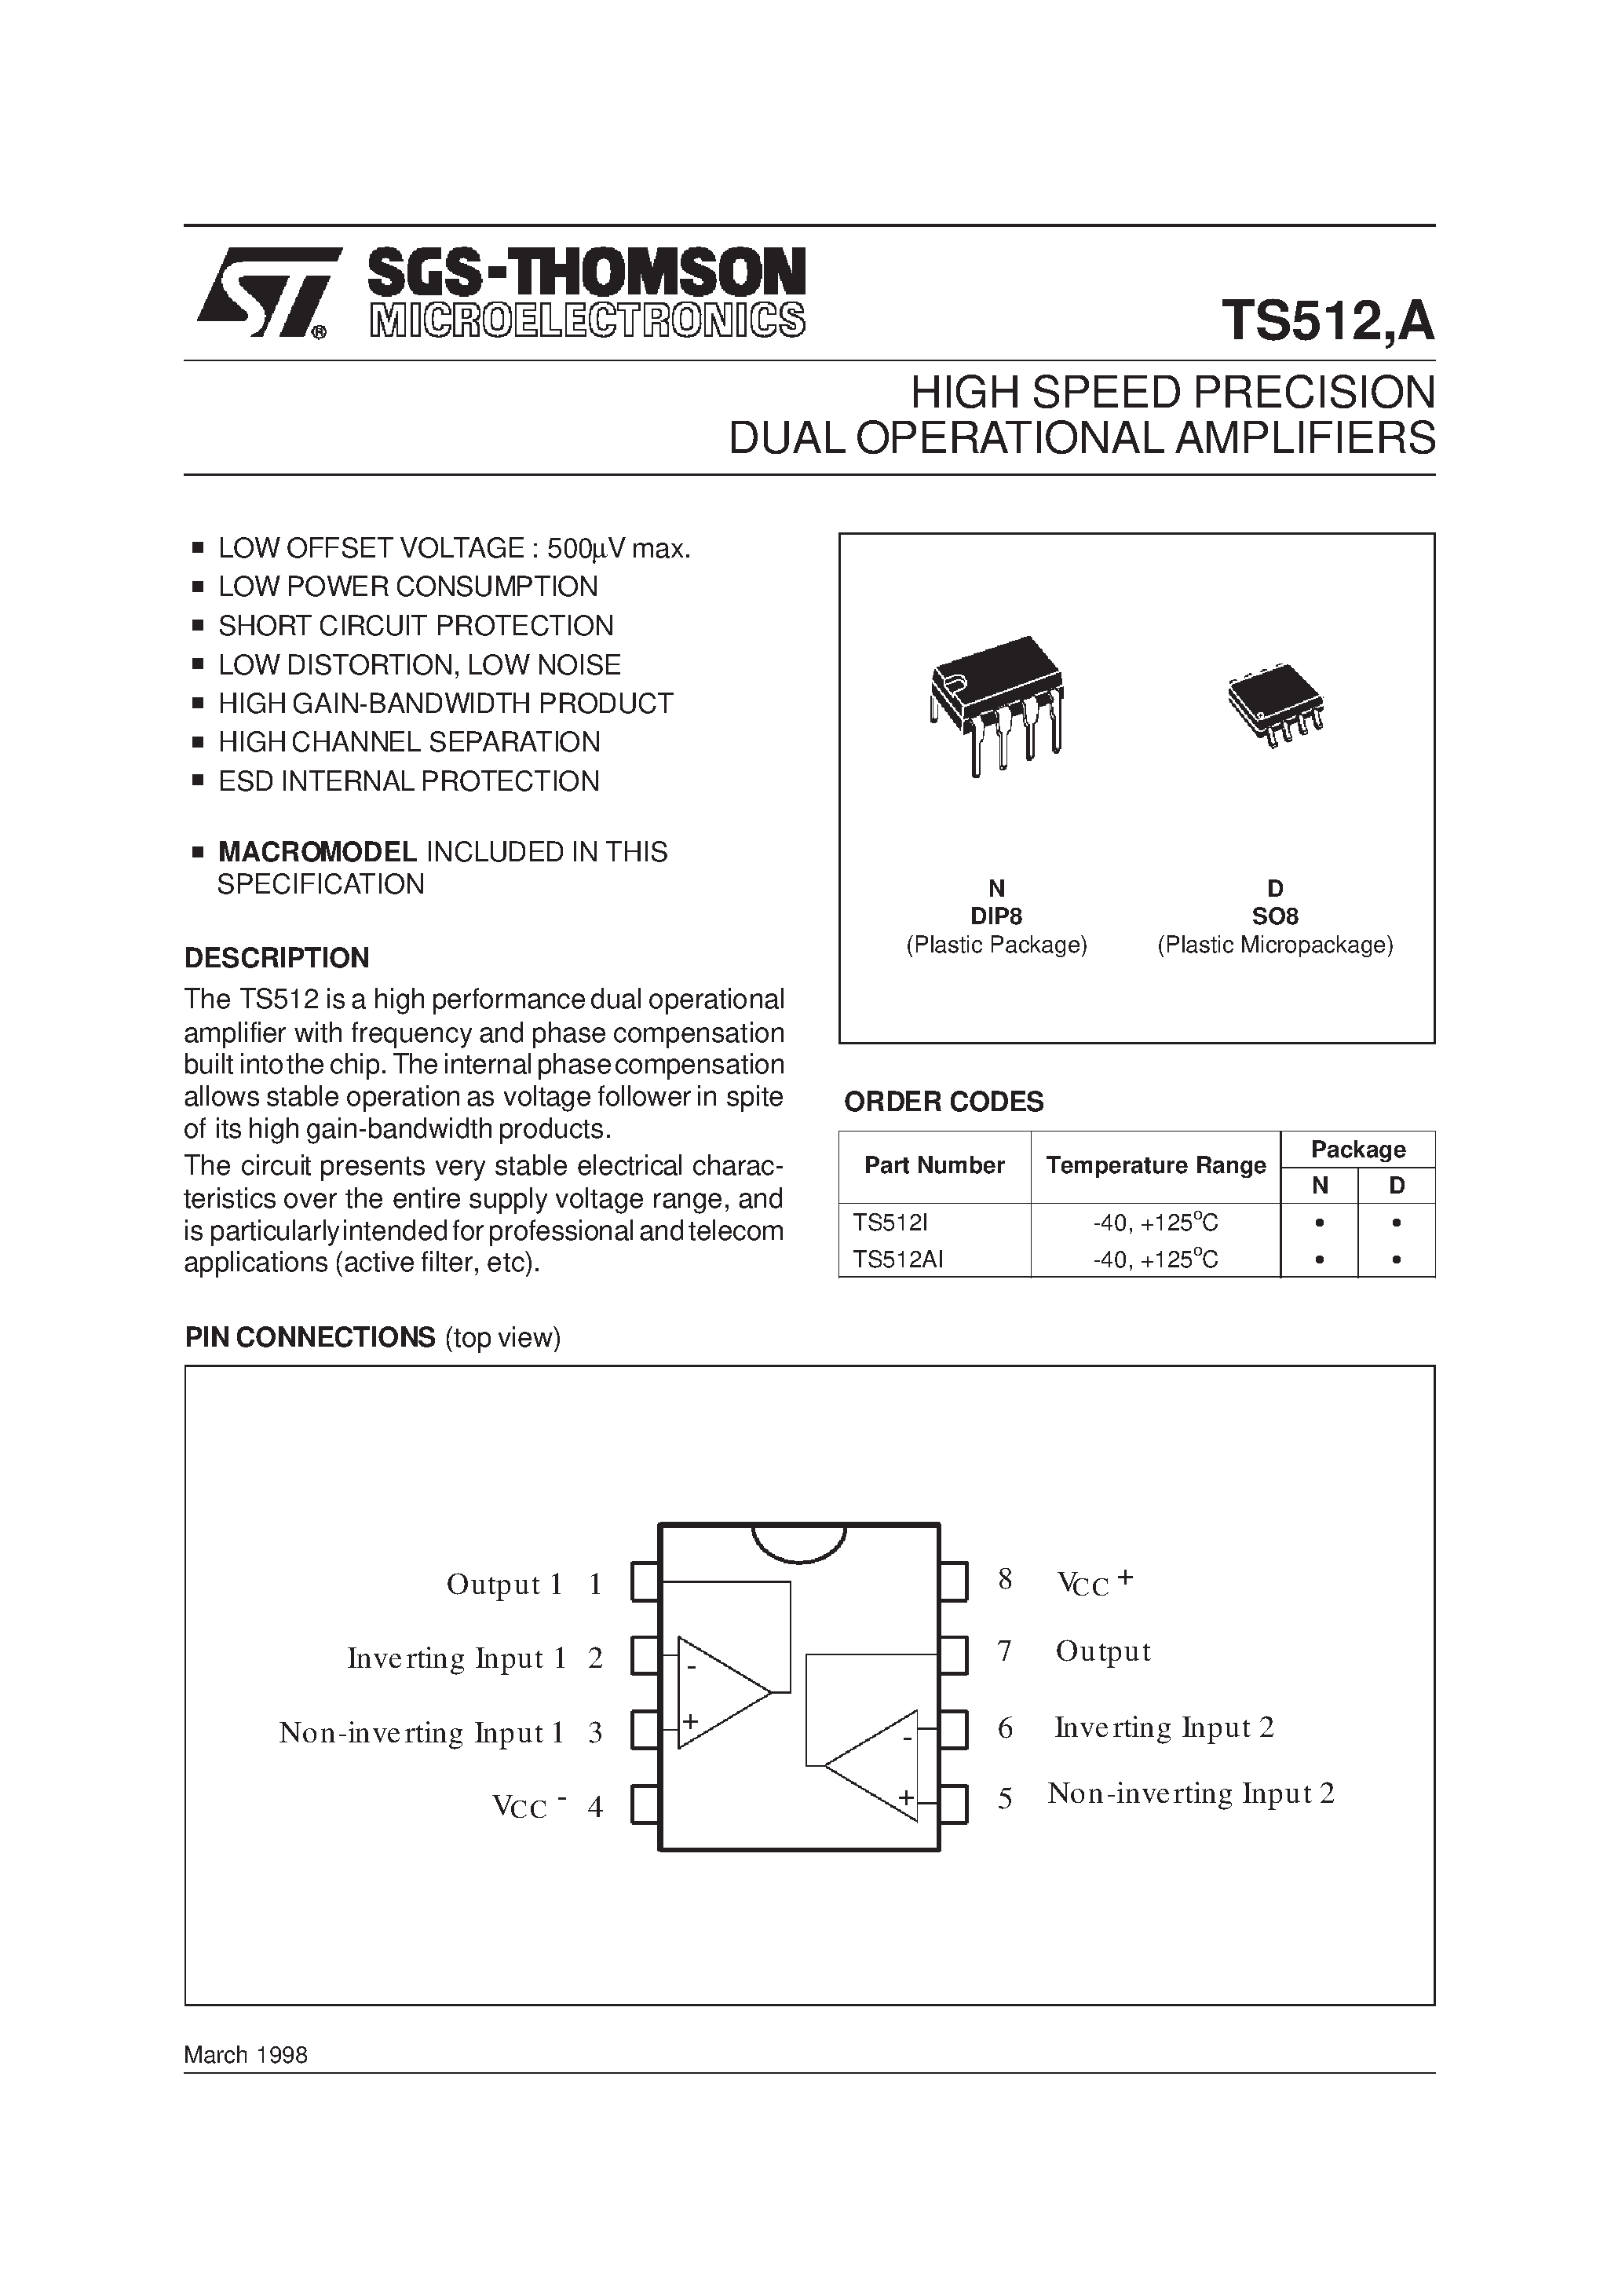 Datasheet TS512 - HIGH SPEED PRECISION DUAL OPERATIONAL AMPLIFIERS page 1